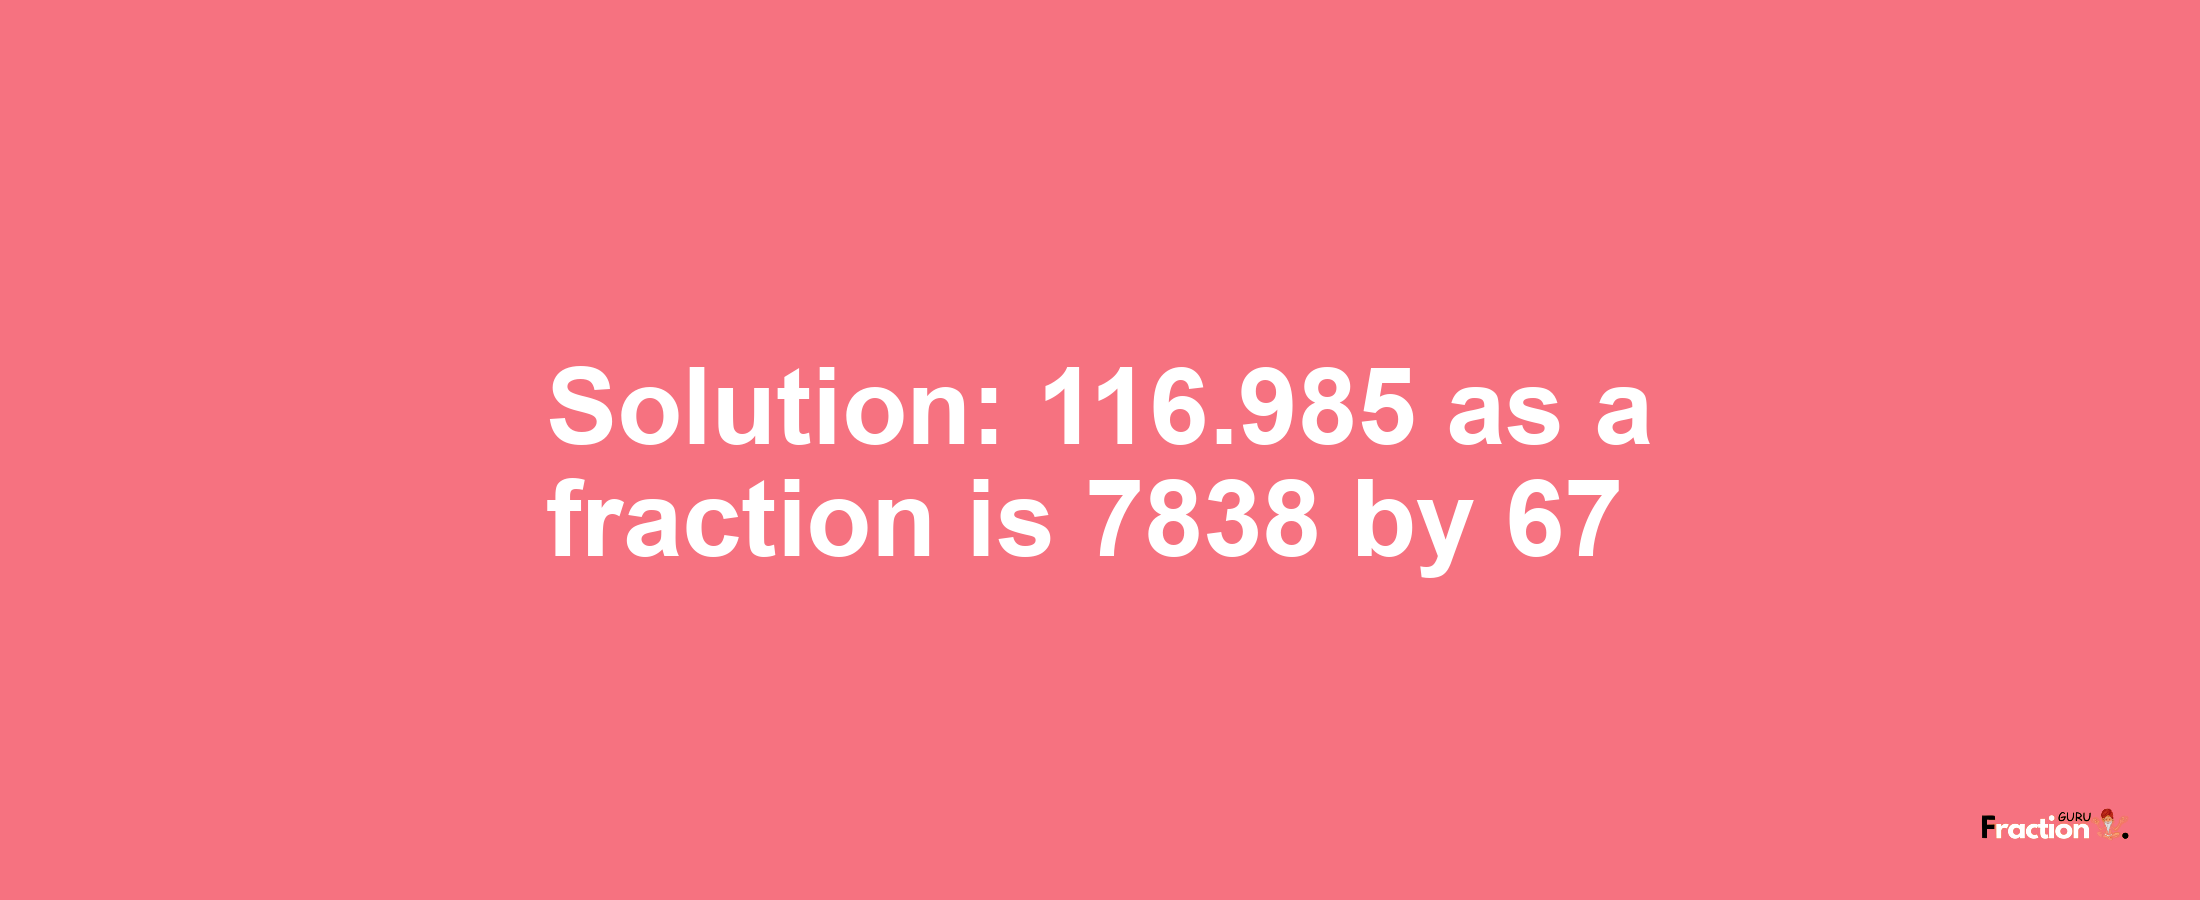 Solution:116.985 as a fraction is 7838/67